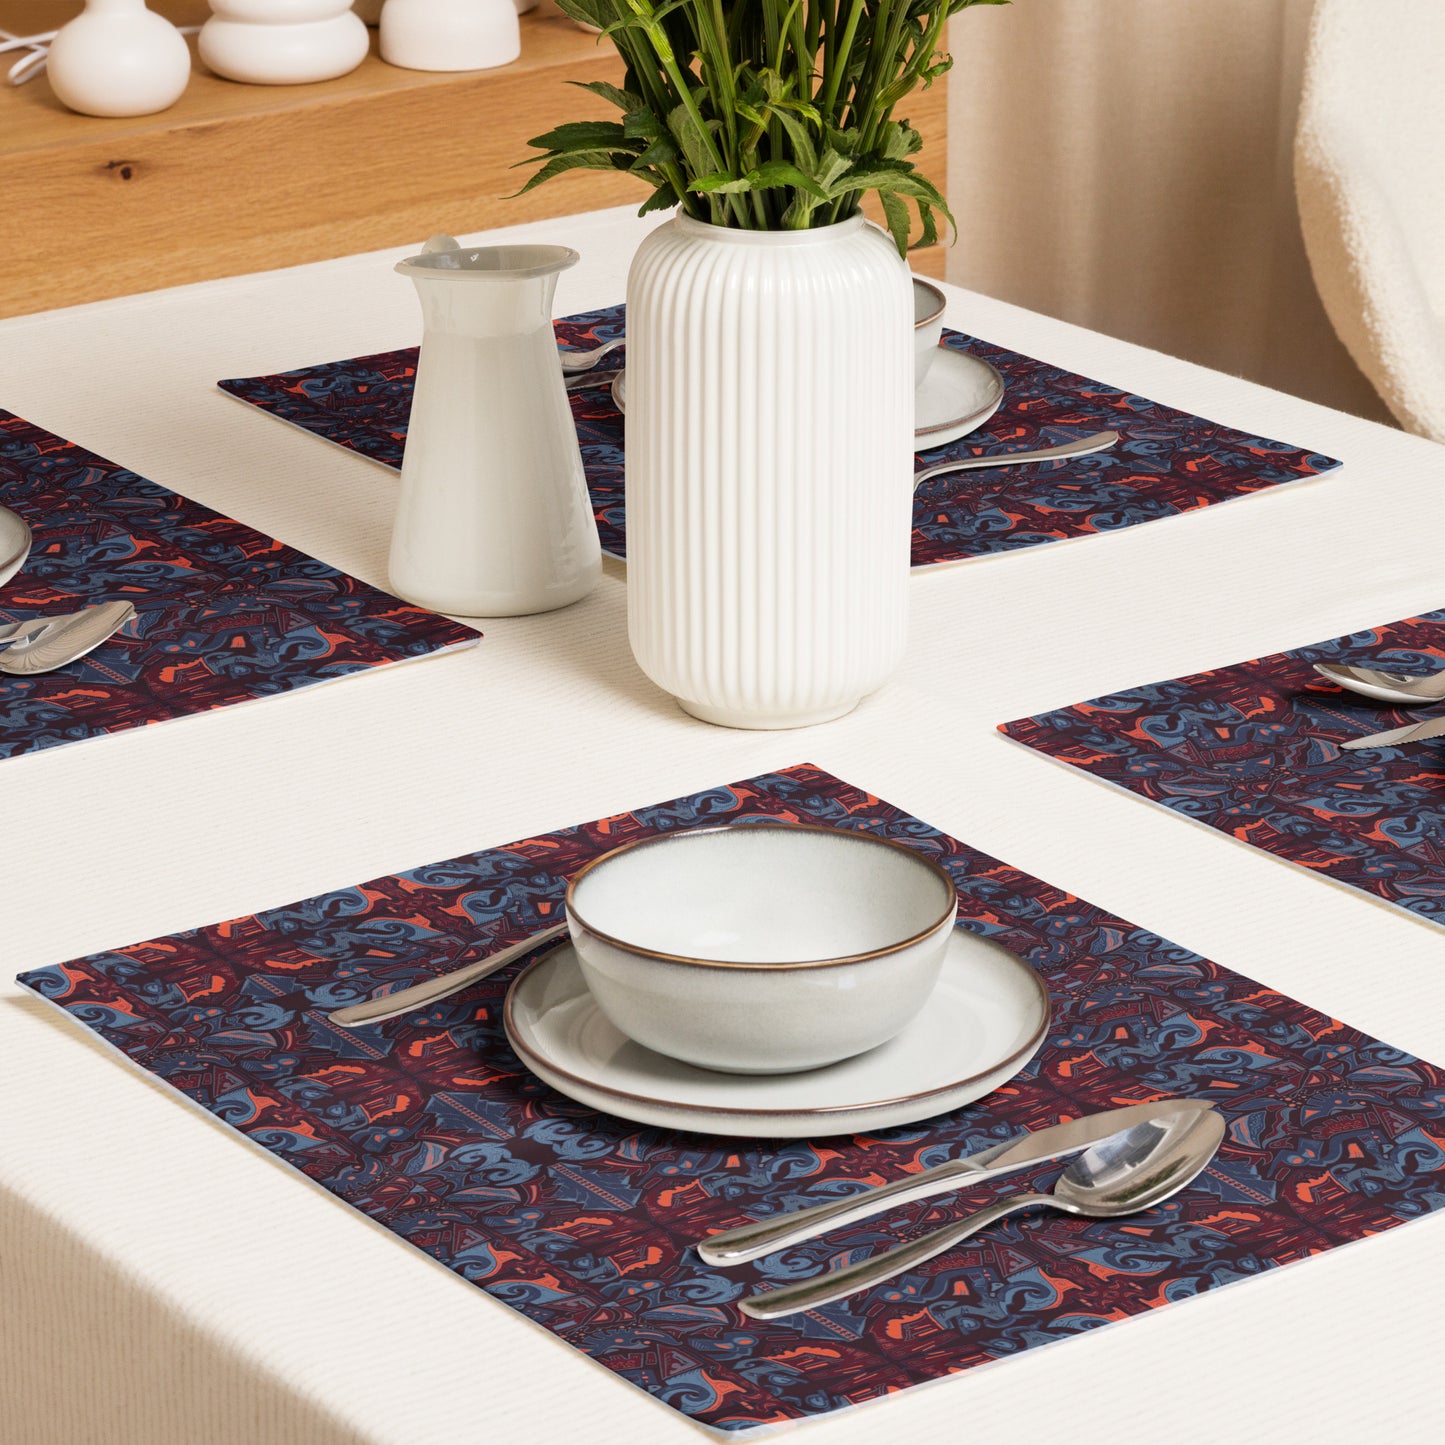 Many Paths Placemat Set